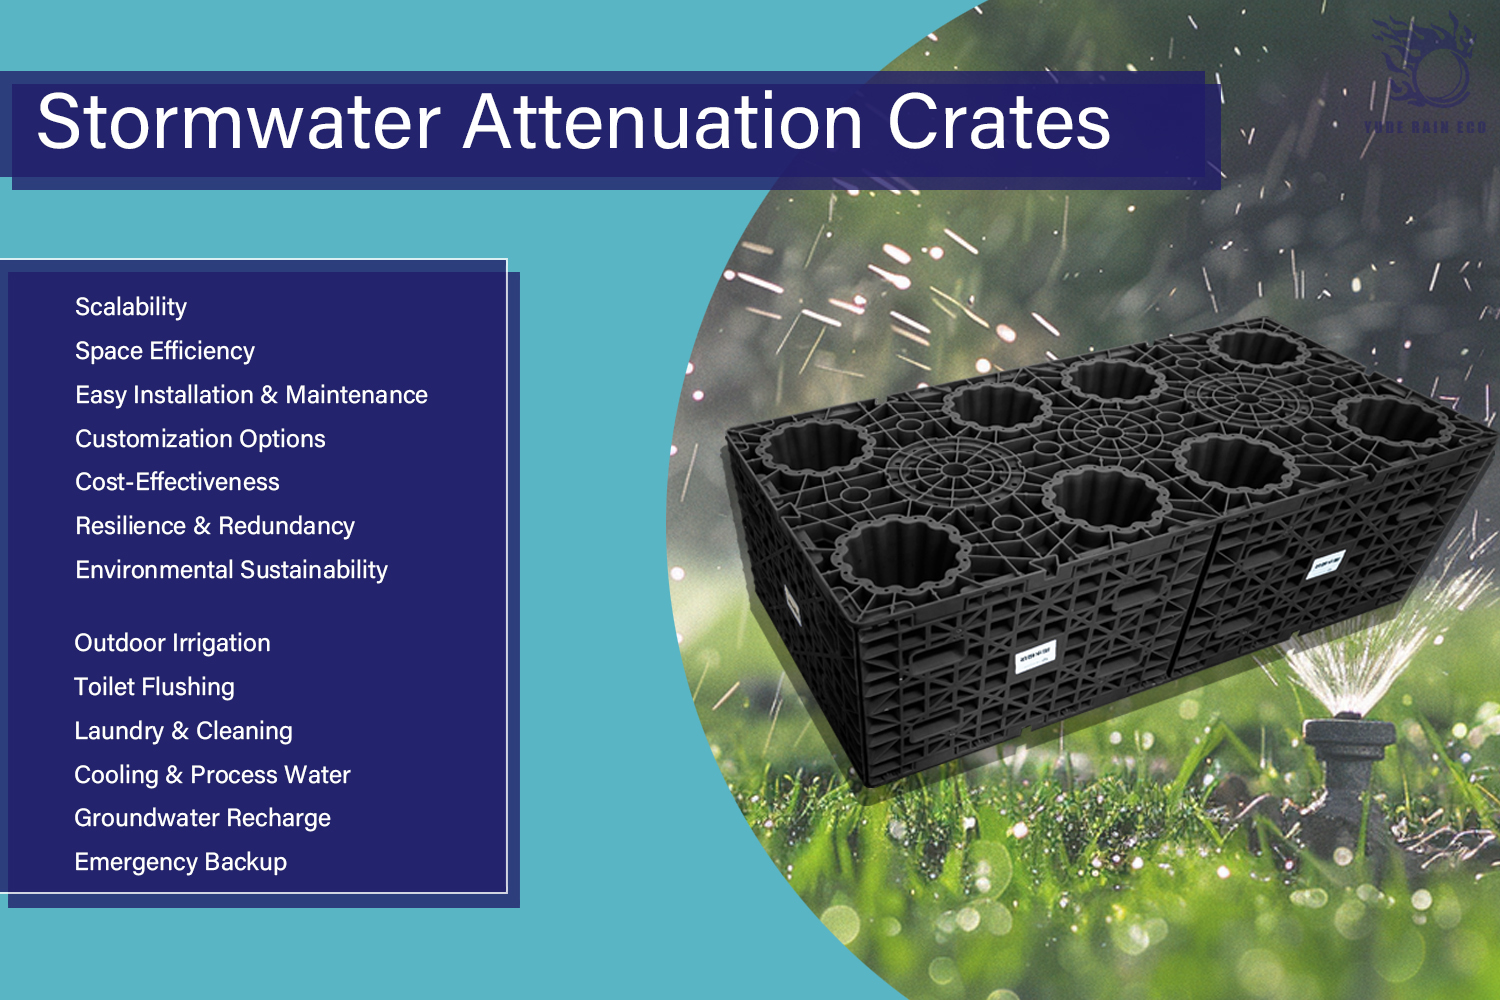 Stormwater Attenuation Crates